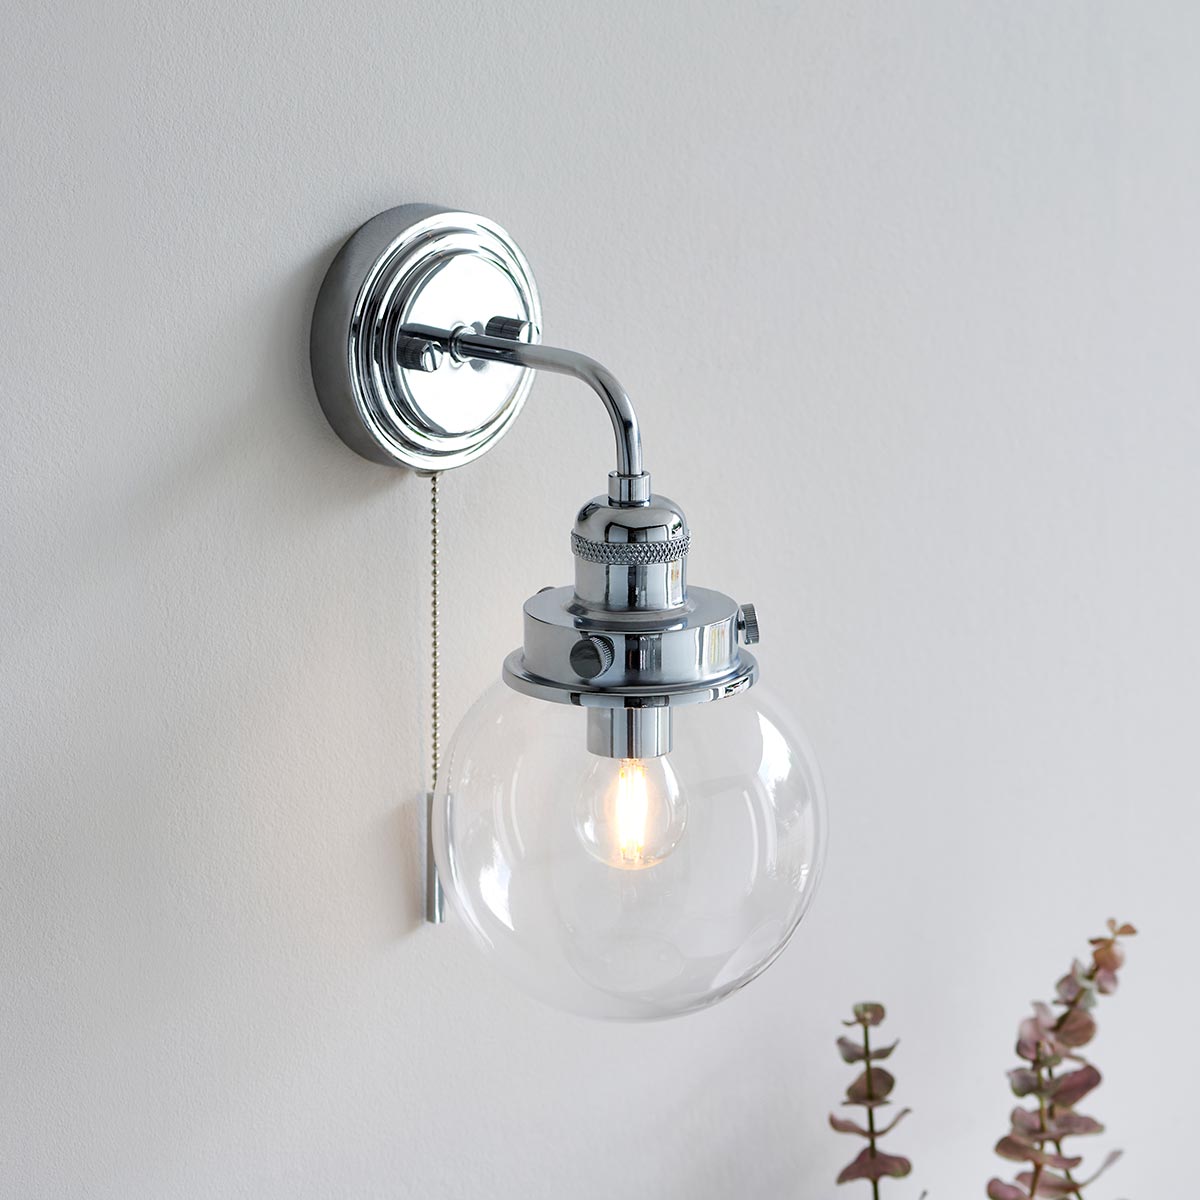 Endon Cheswick Switched Bathroom Wall Light Chrome Clear Glass